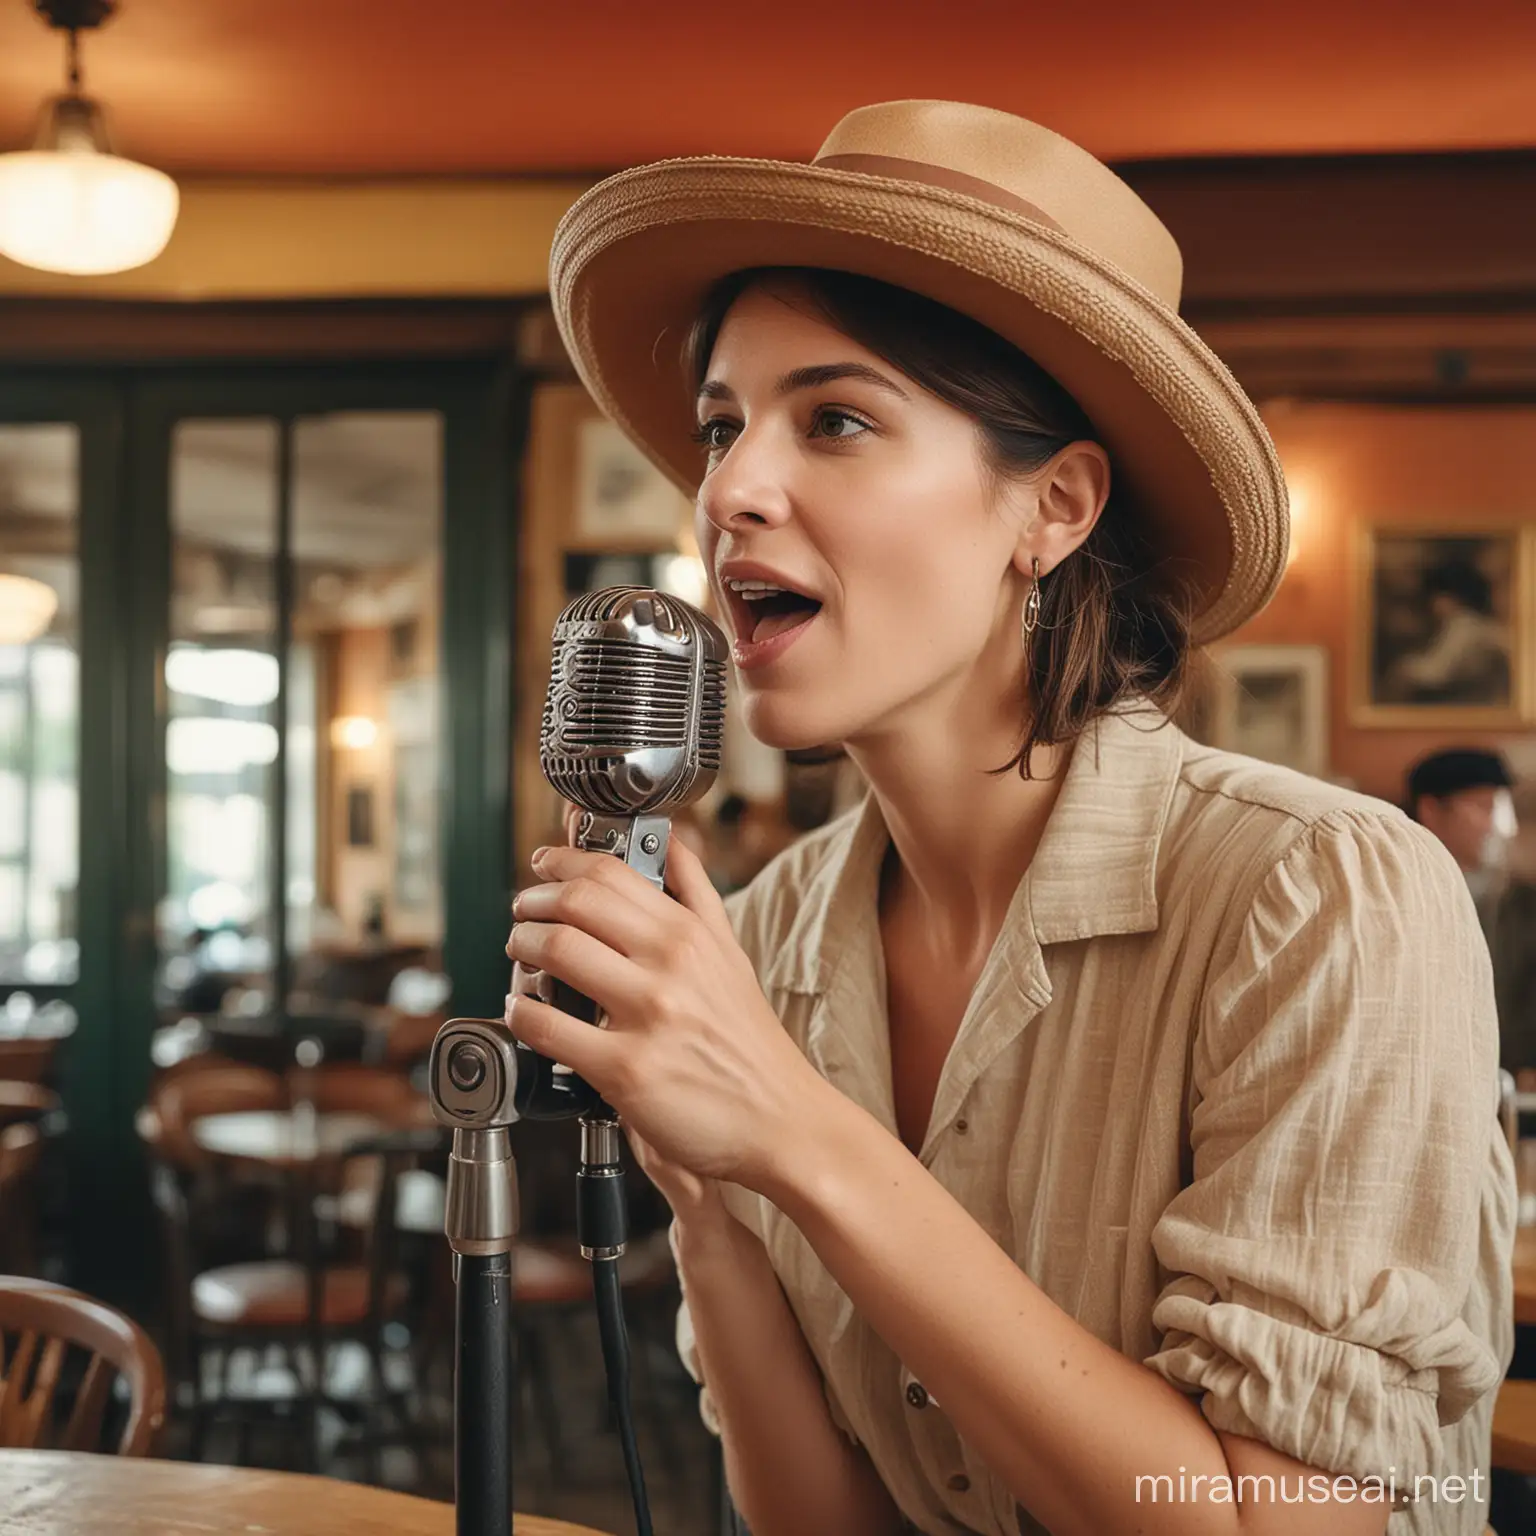 color image of a woman wearing a hat in a large French café, singing soulfully into an old microphone